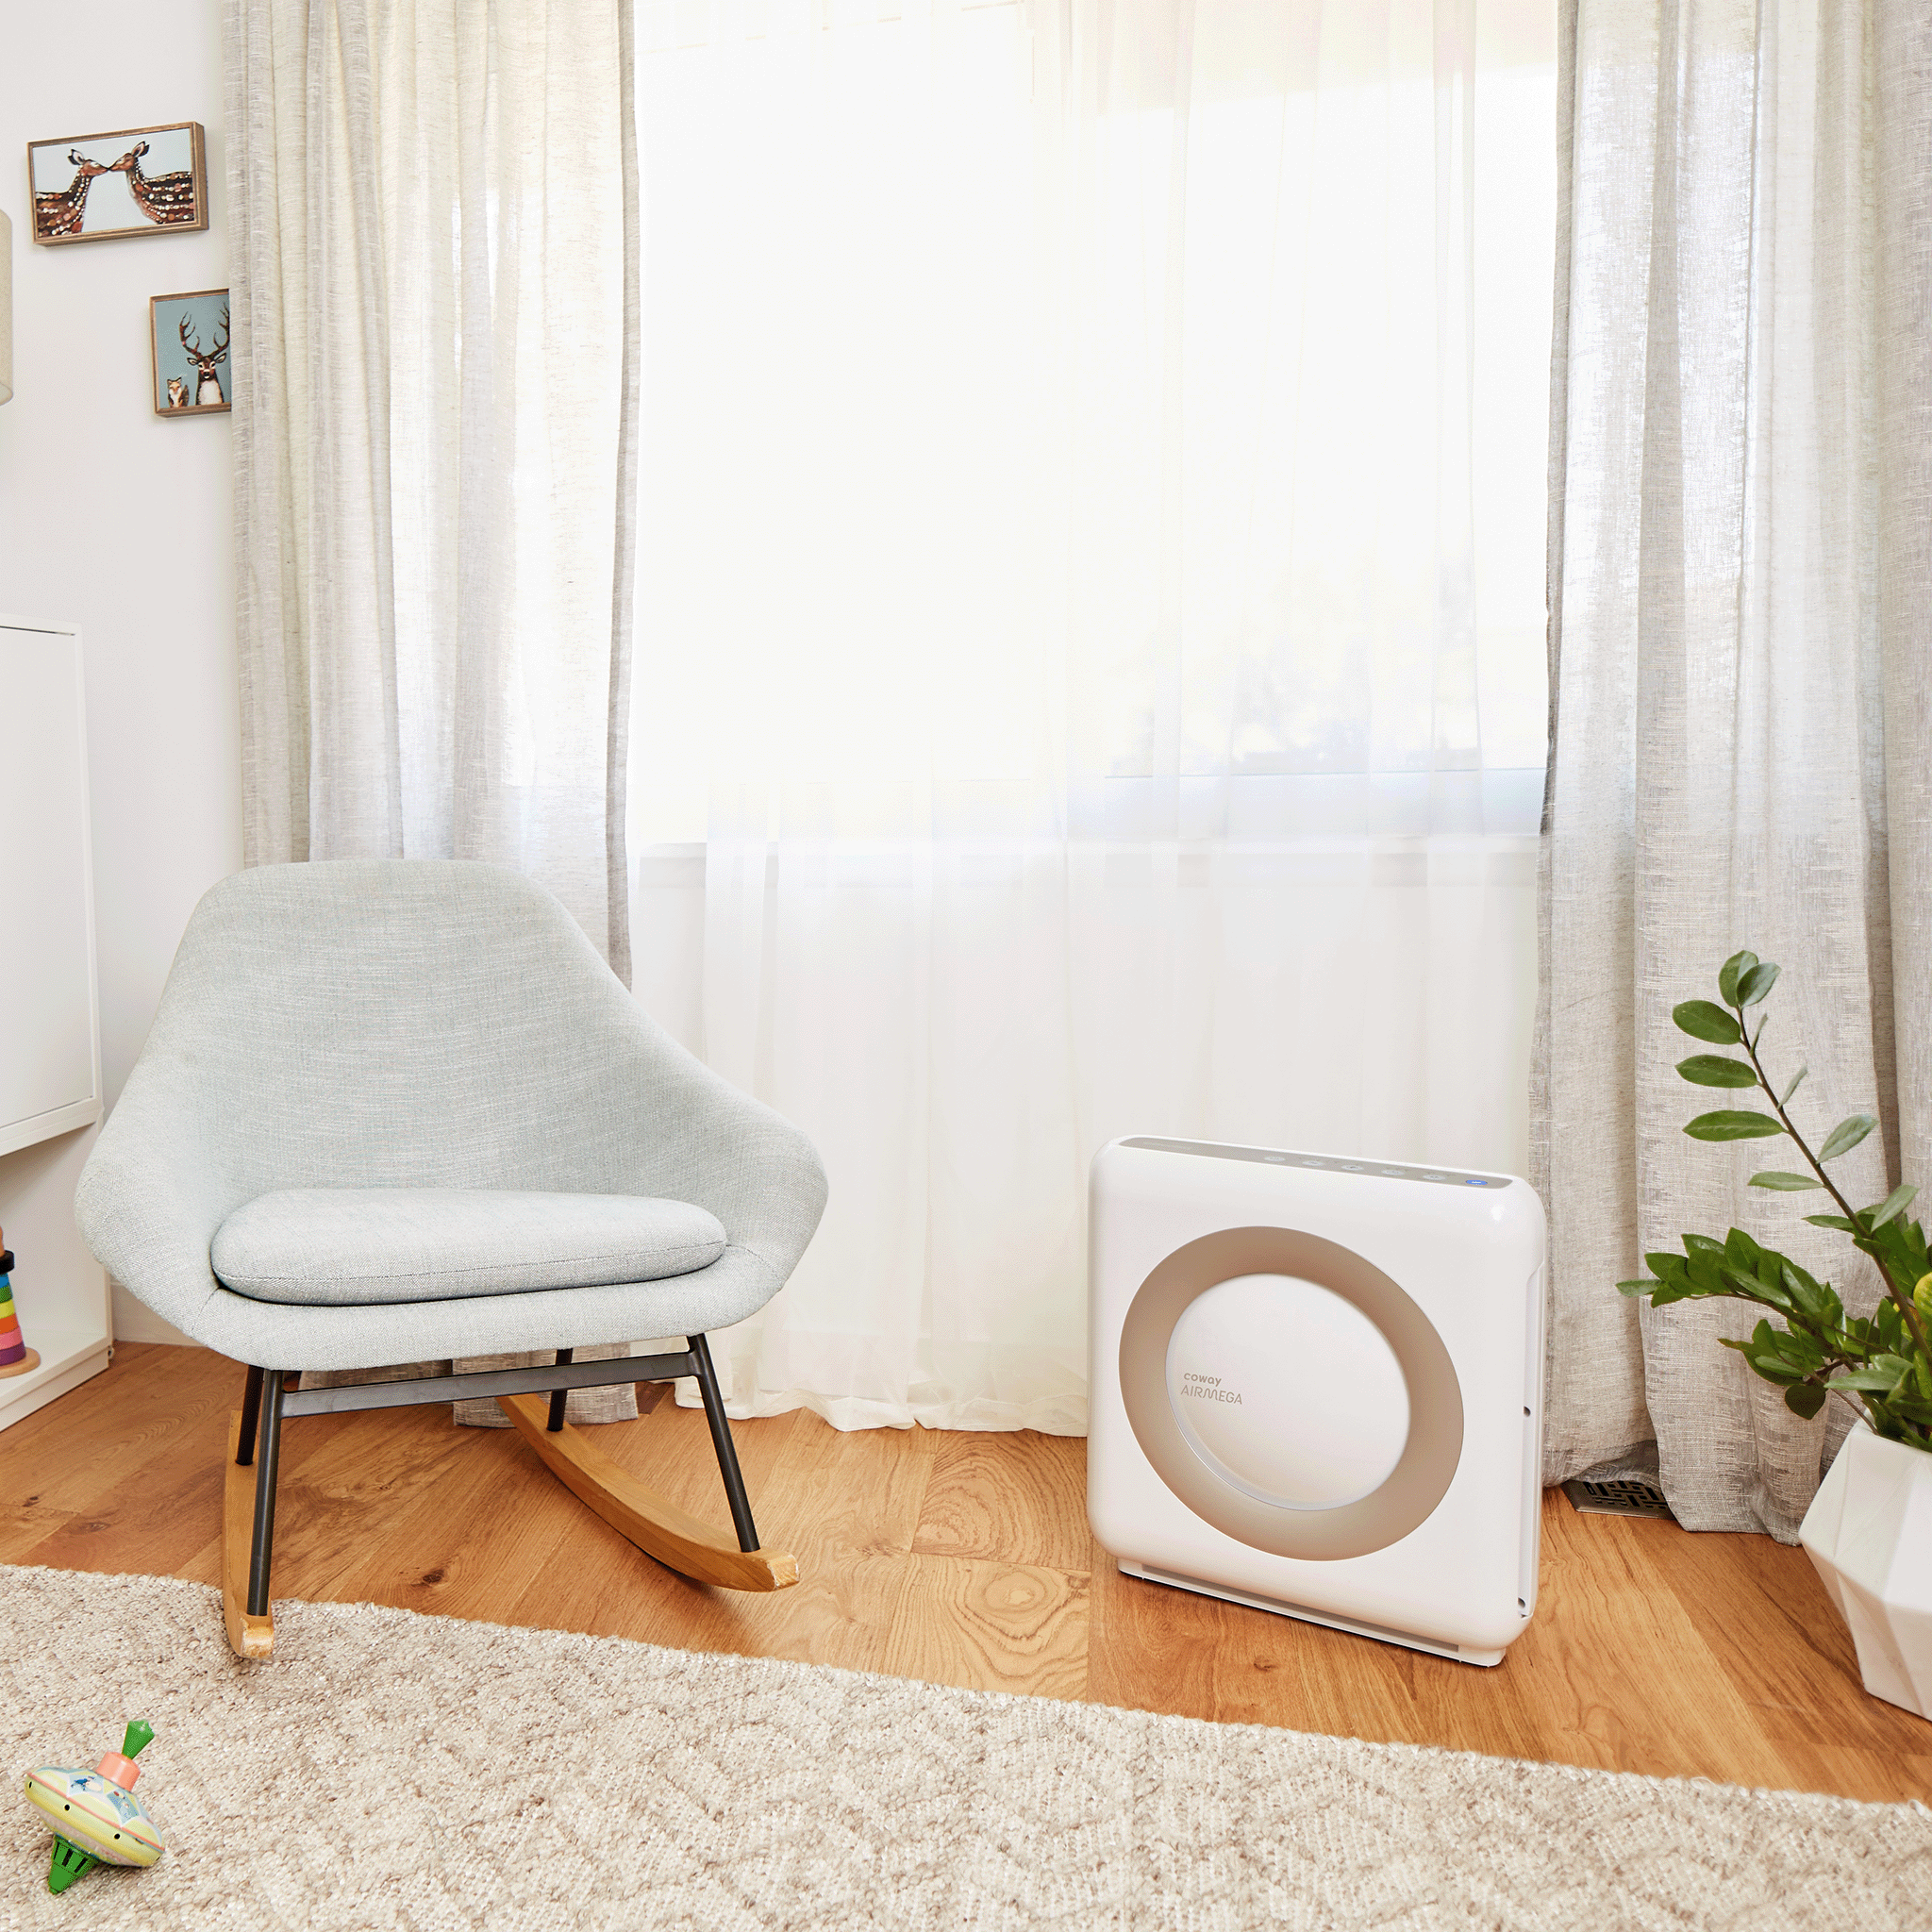 Coway Airmega AP-1512HH in White, placed in a nursery room next to a chair